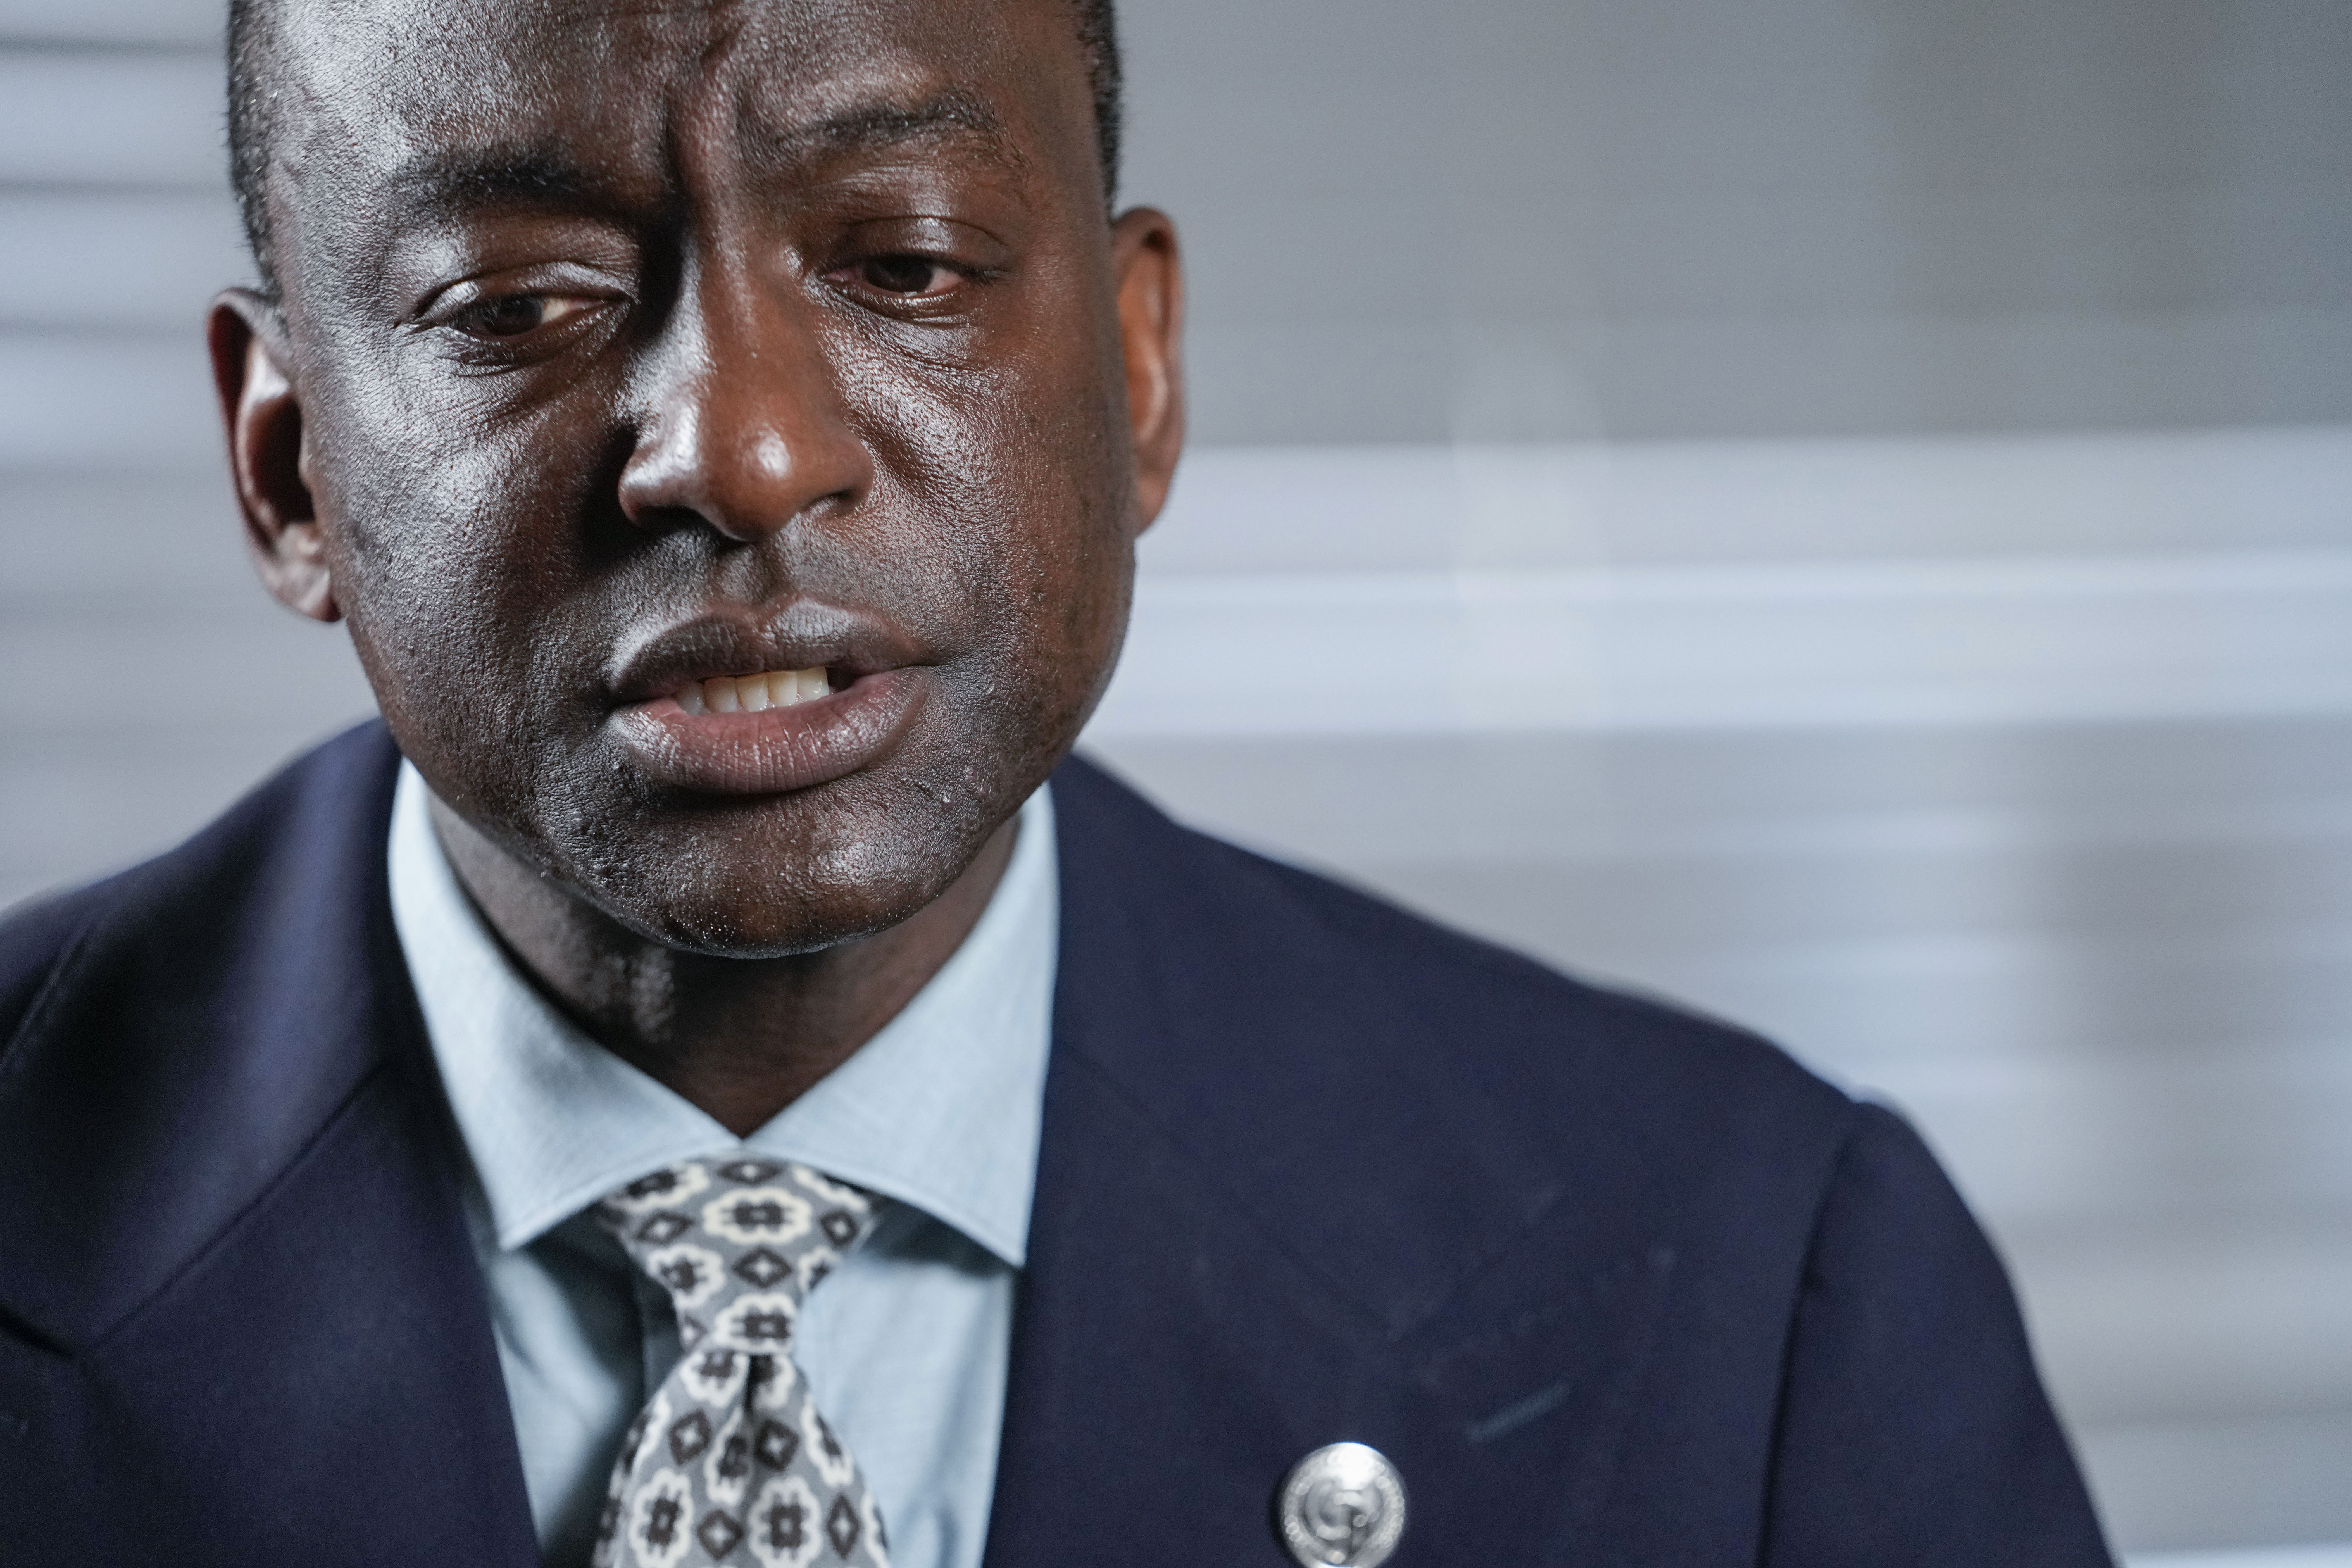 Yusef Salaam, one of the exonerated Central Park Five, has wona seat on the NYC Council. Photo credit:Mary Altaffer, The Associated Press